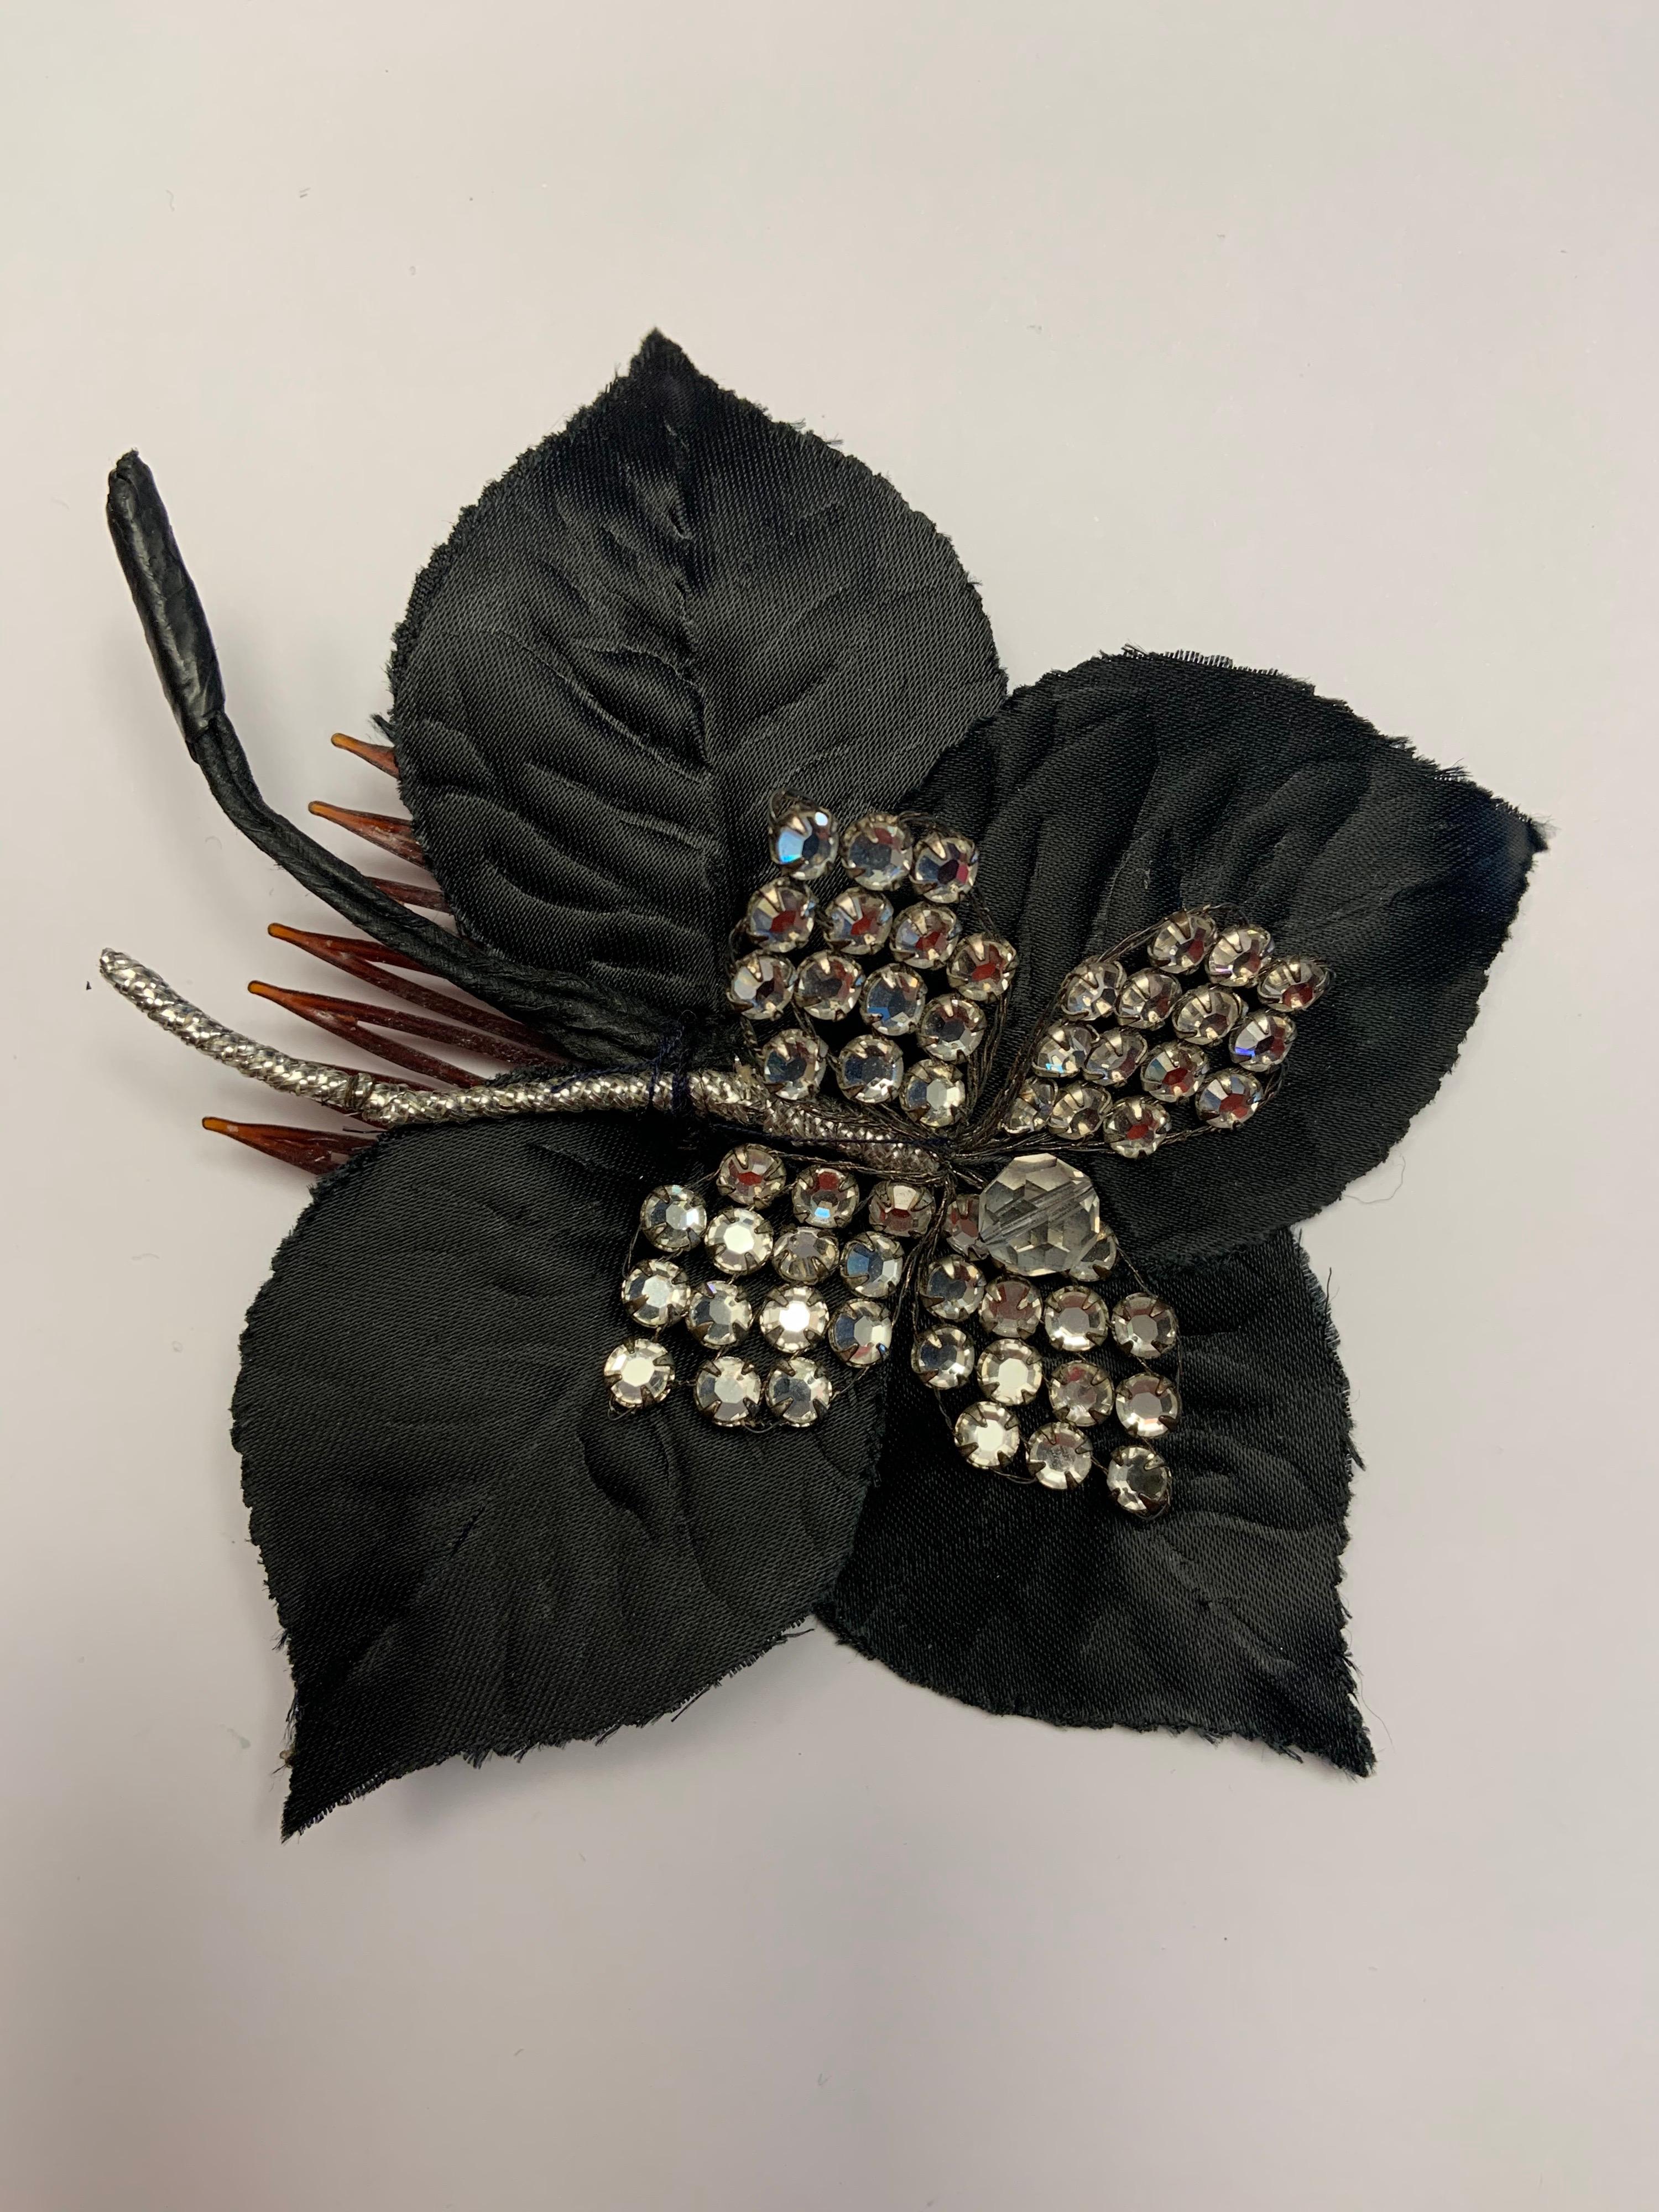 Arnold Scaasi, best known for designing stylish clothing, created this chic hair ornament with four large black silk leaves topped by four prong set rhinestone leaves with a faceted crystal bead in the center. This is hand sewn to a small hair comb.